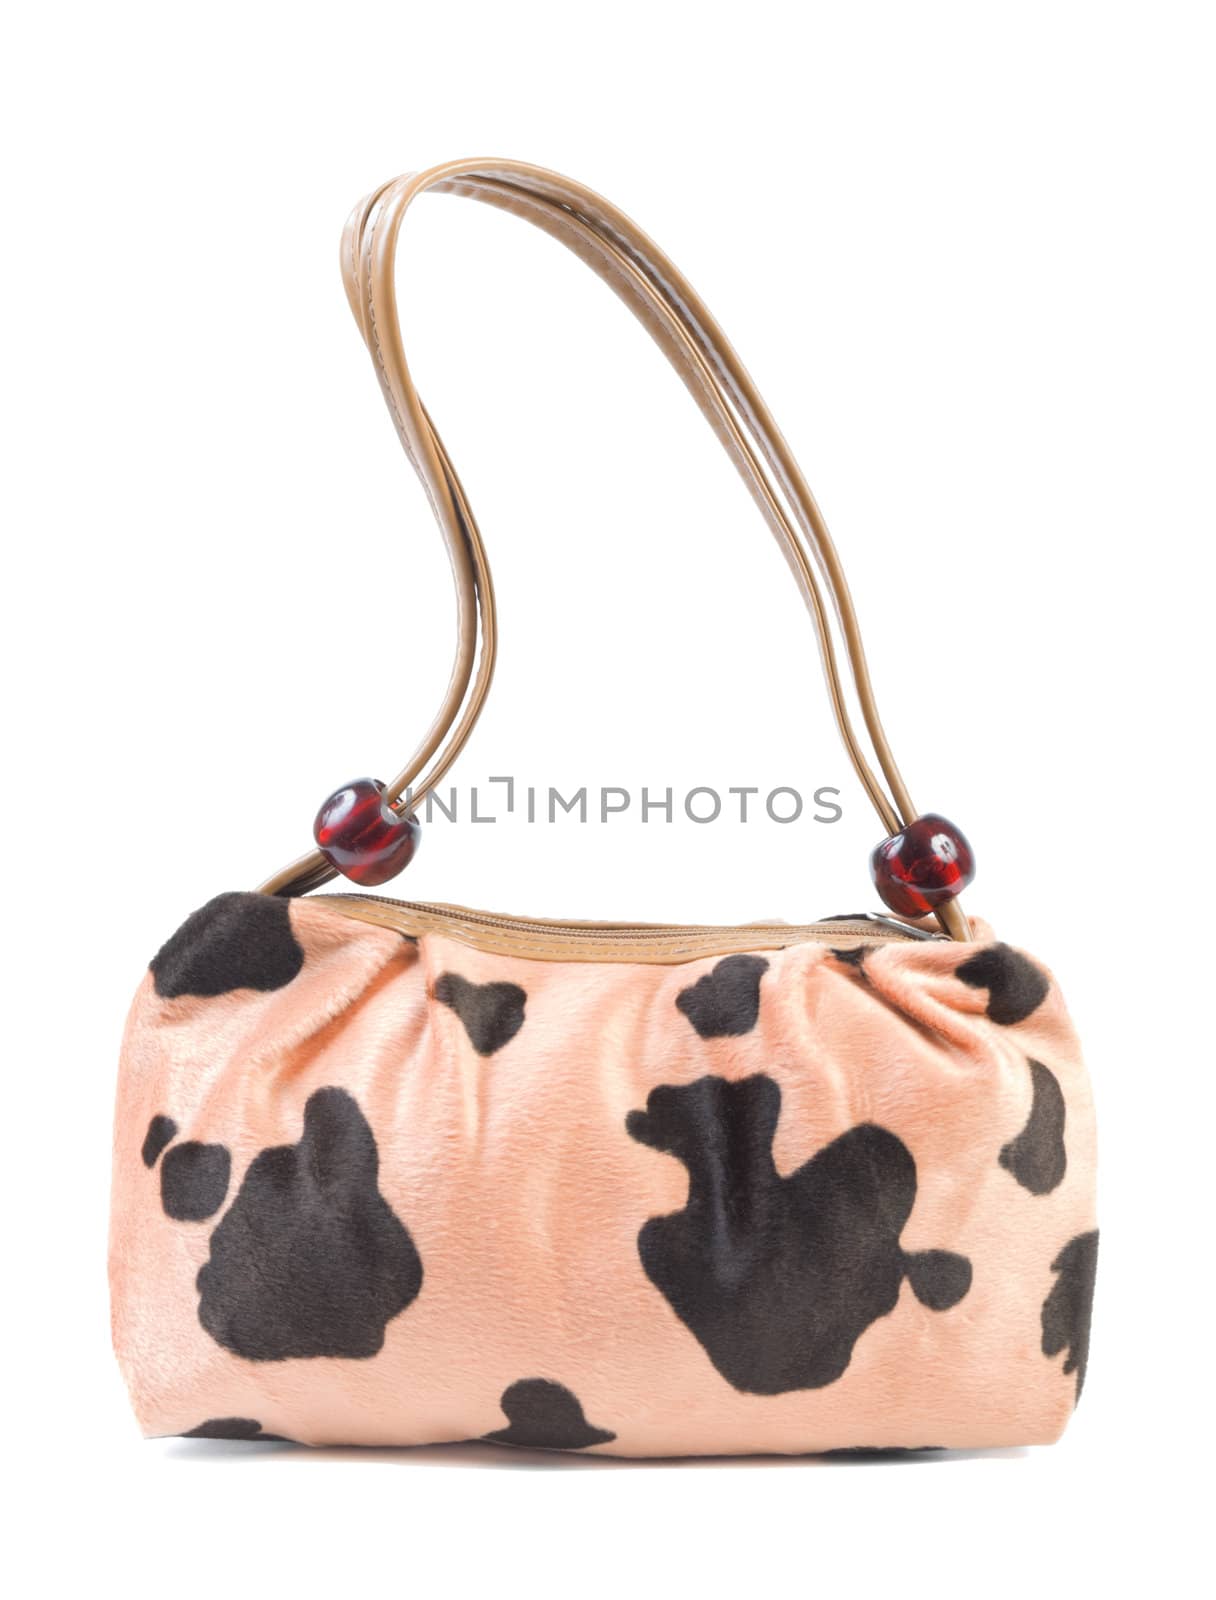 Pink female handbag with spots. Isolated on white background